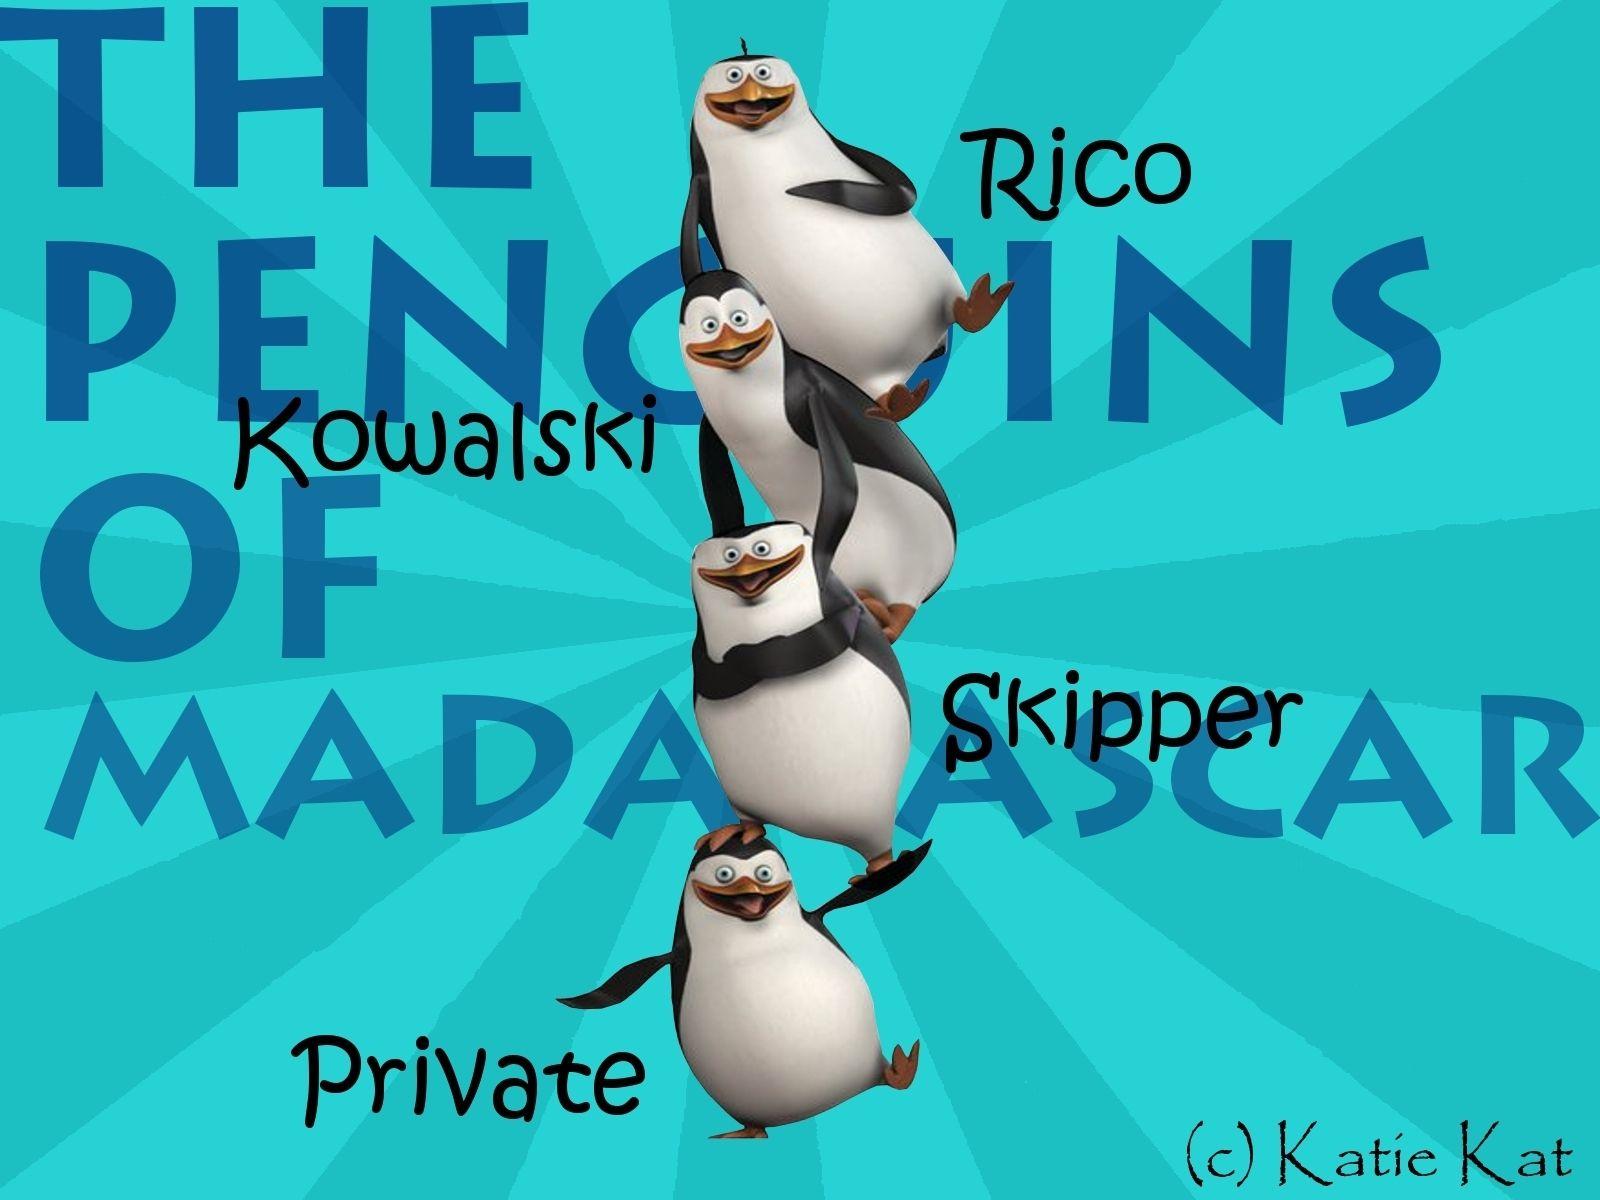 Creative The Penguins Madagascar Image in High Definition